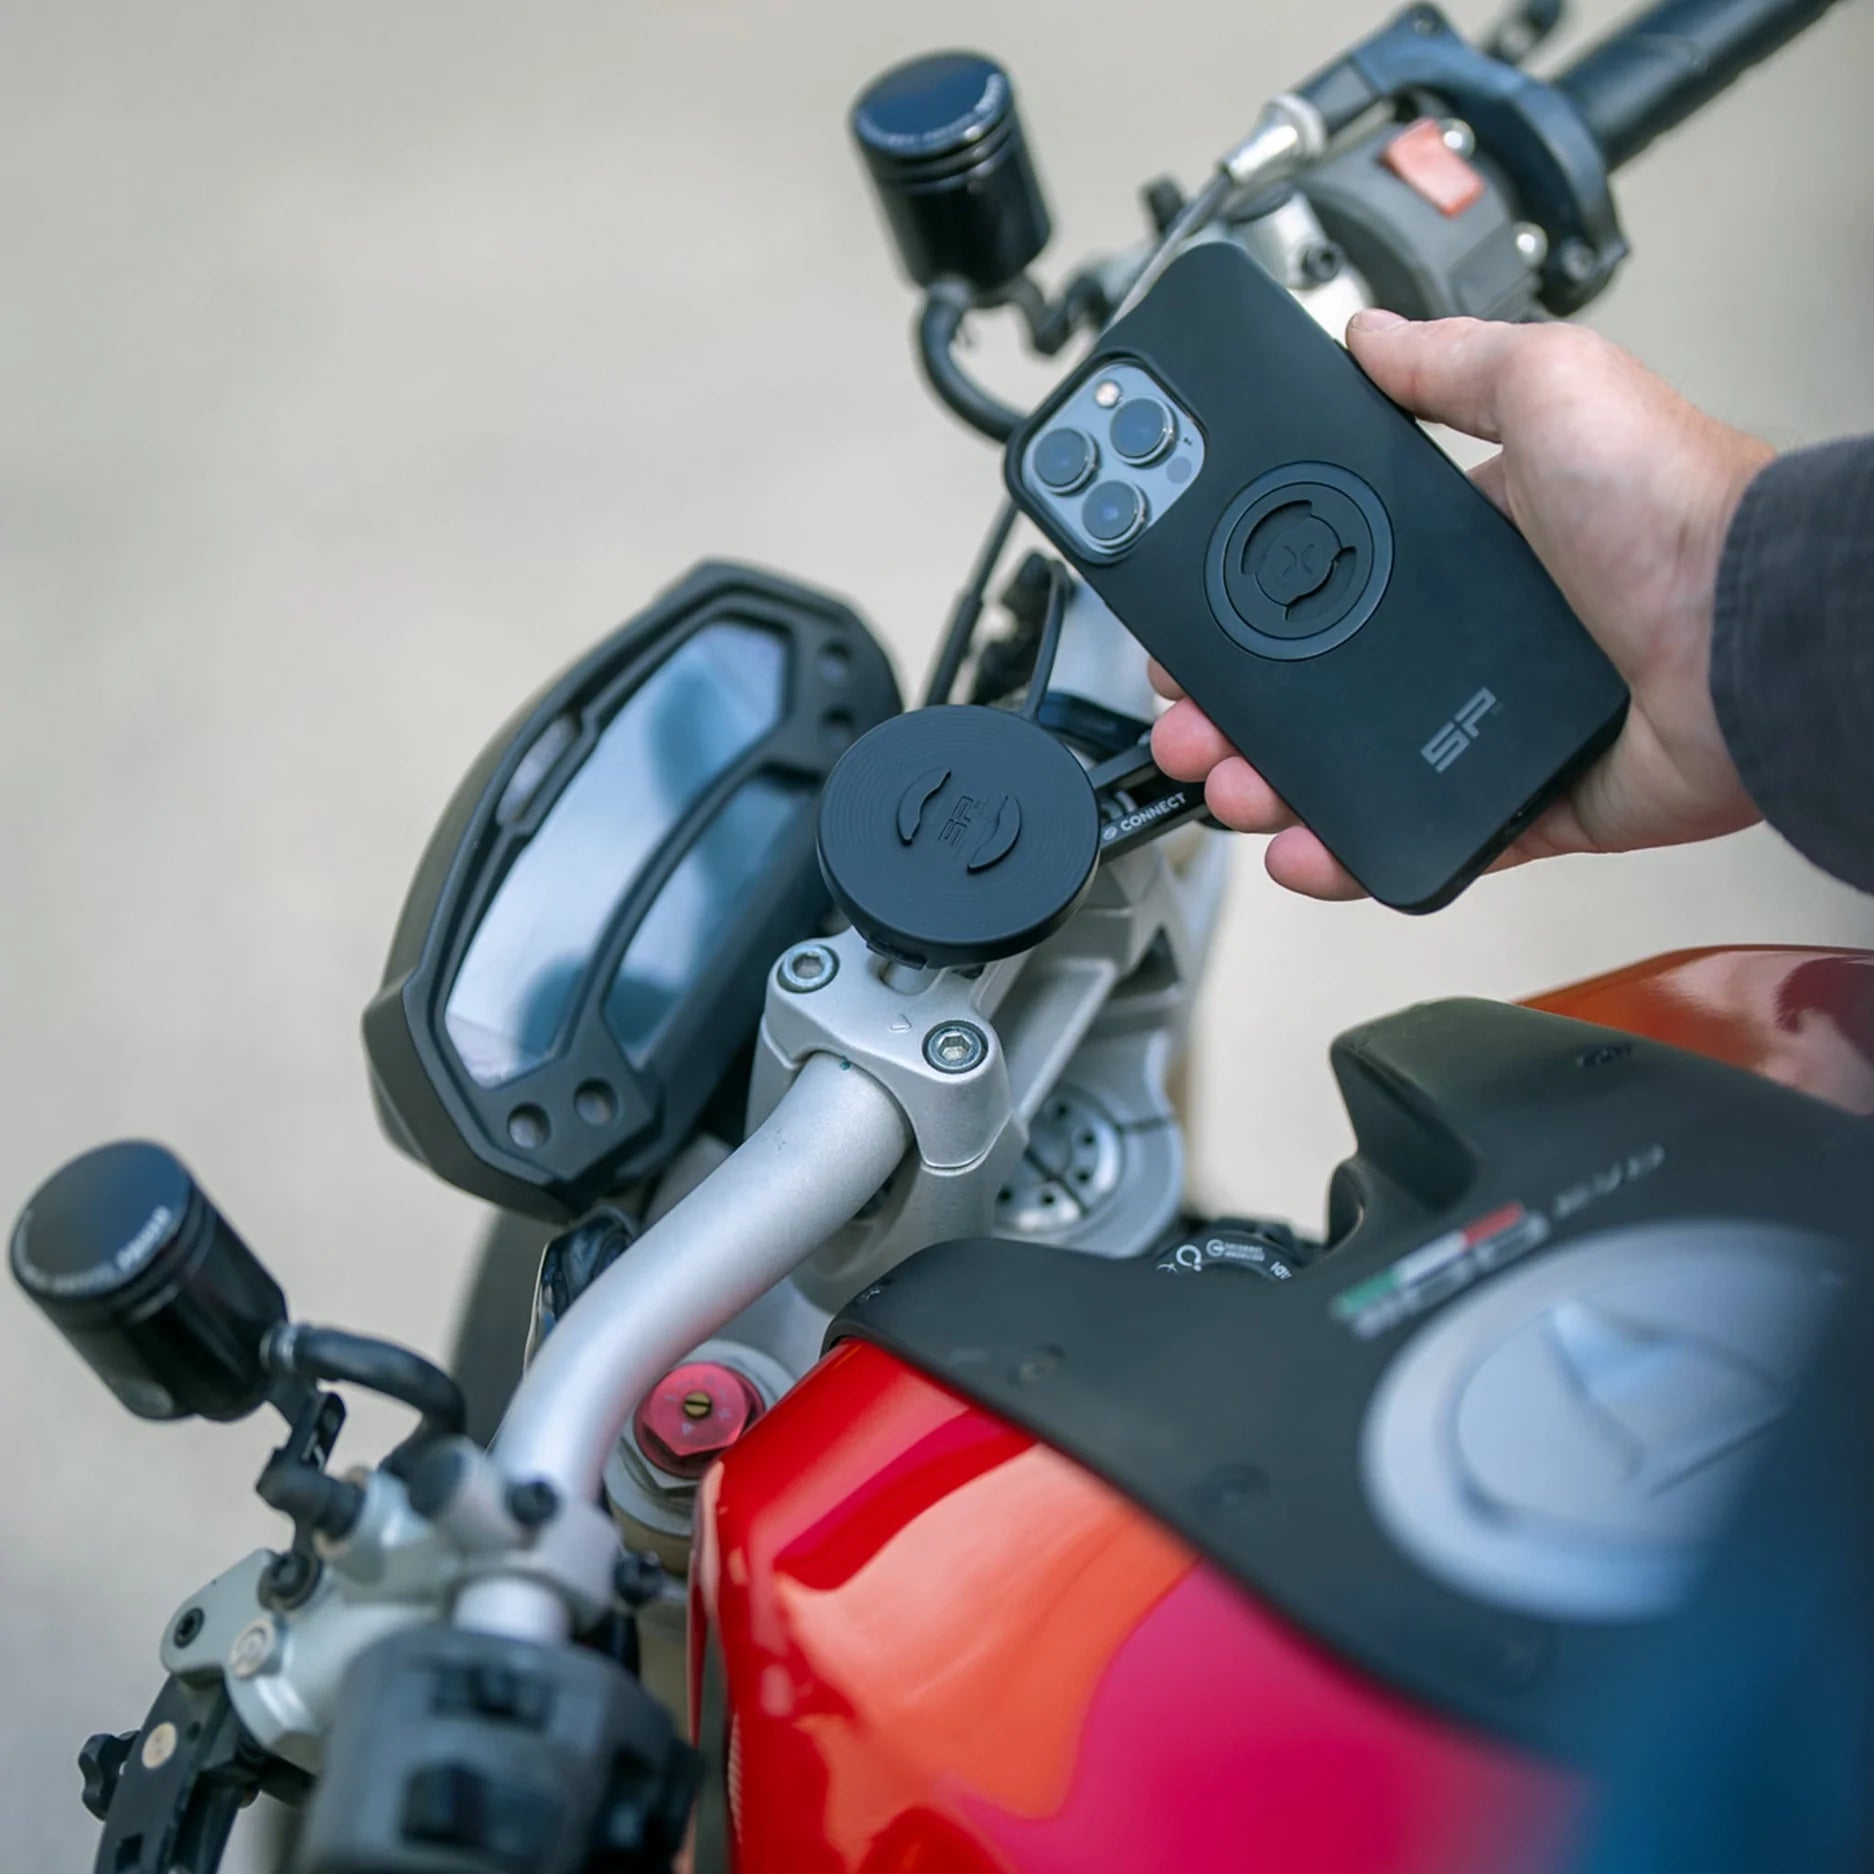 A phone being mounted with the SPC mounts  on a red motorcycle 